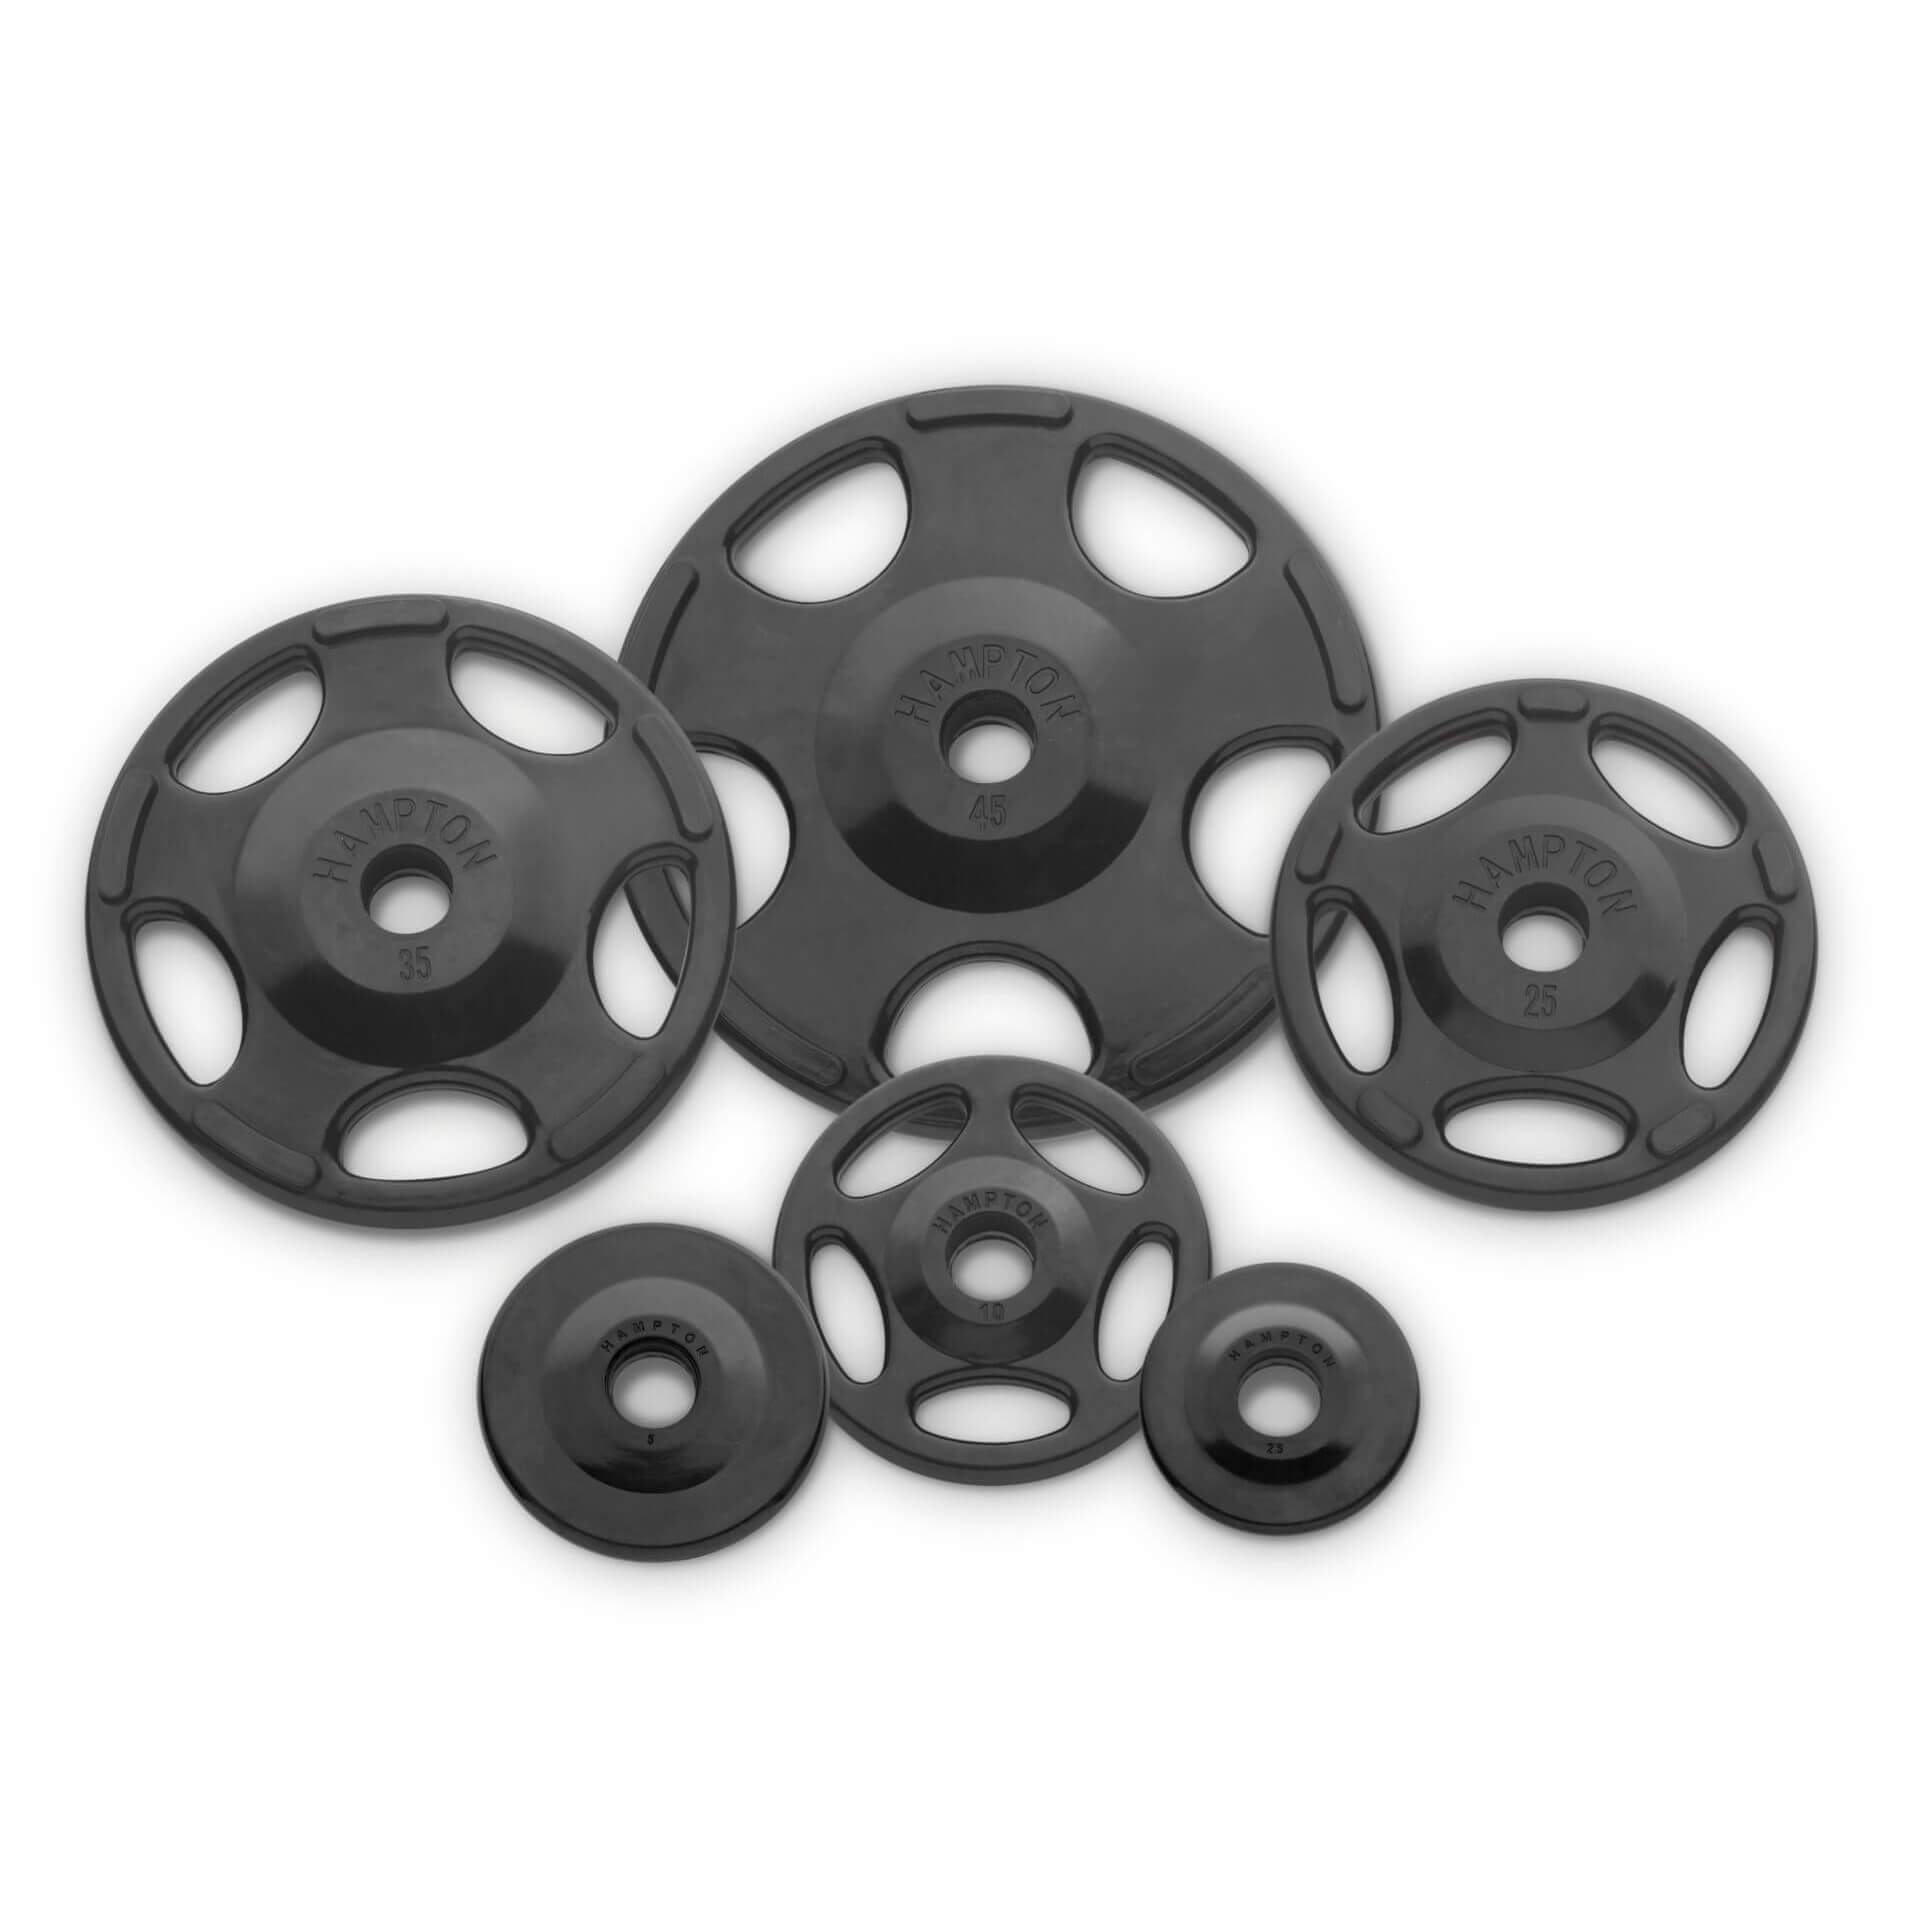 Singles & Pairs HAJEX Black Coated Bumper Olympic Weight Plate